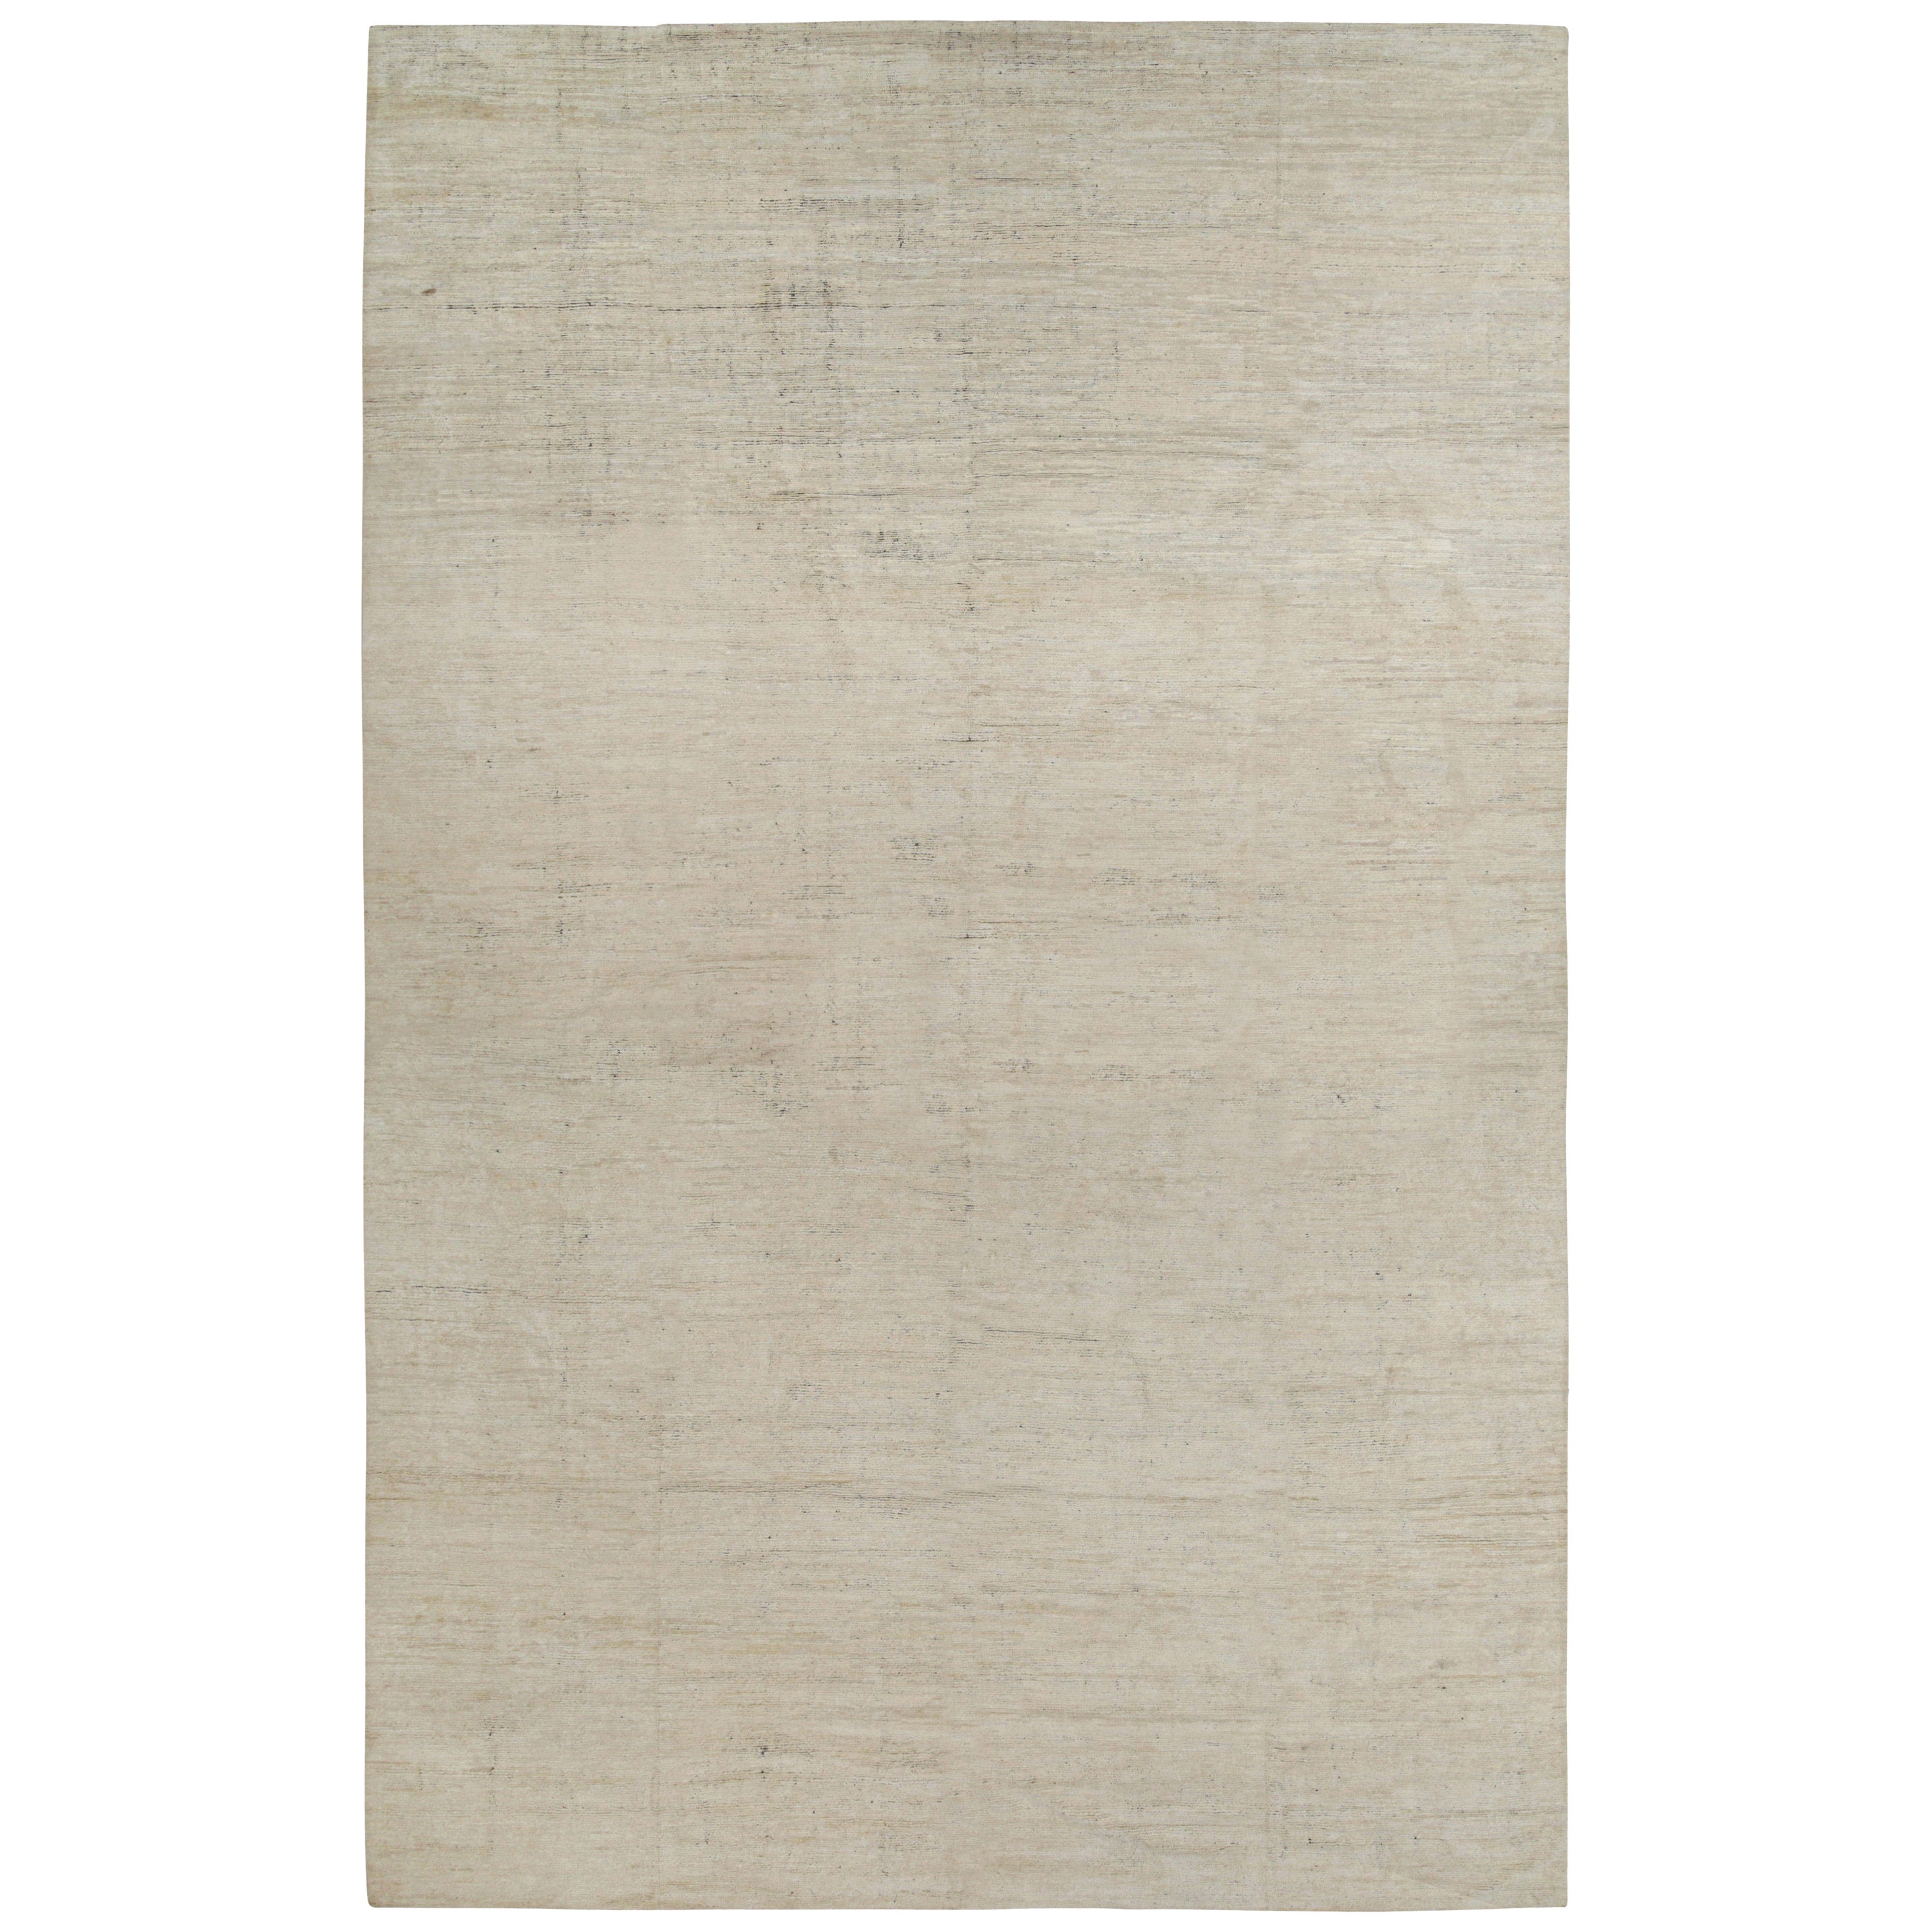 This 15x24 rug is a grand new entry to Rug & Kilim’s Texture of Color Collection. Hand-knotted in wool, silk, and cotton.
Further on the Design:
The collection enjoys an inventive take on plain rugs, and a patternless take on pattern in meticulous,